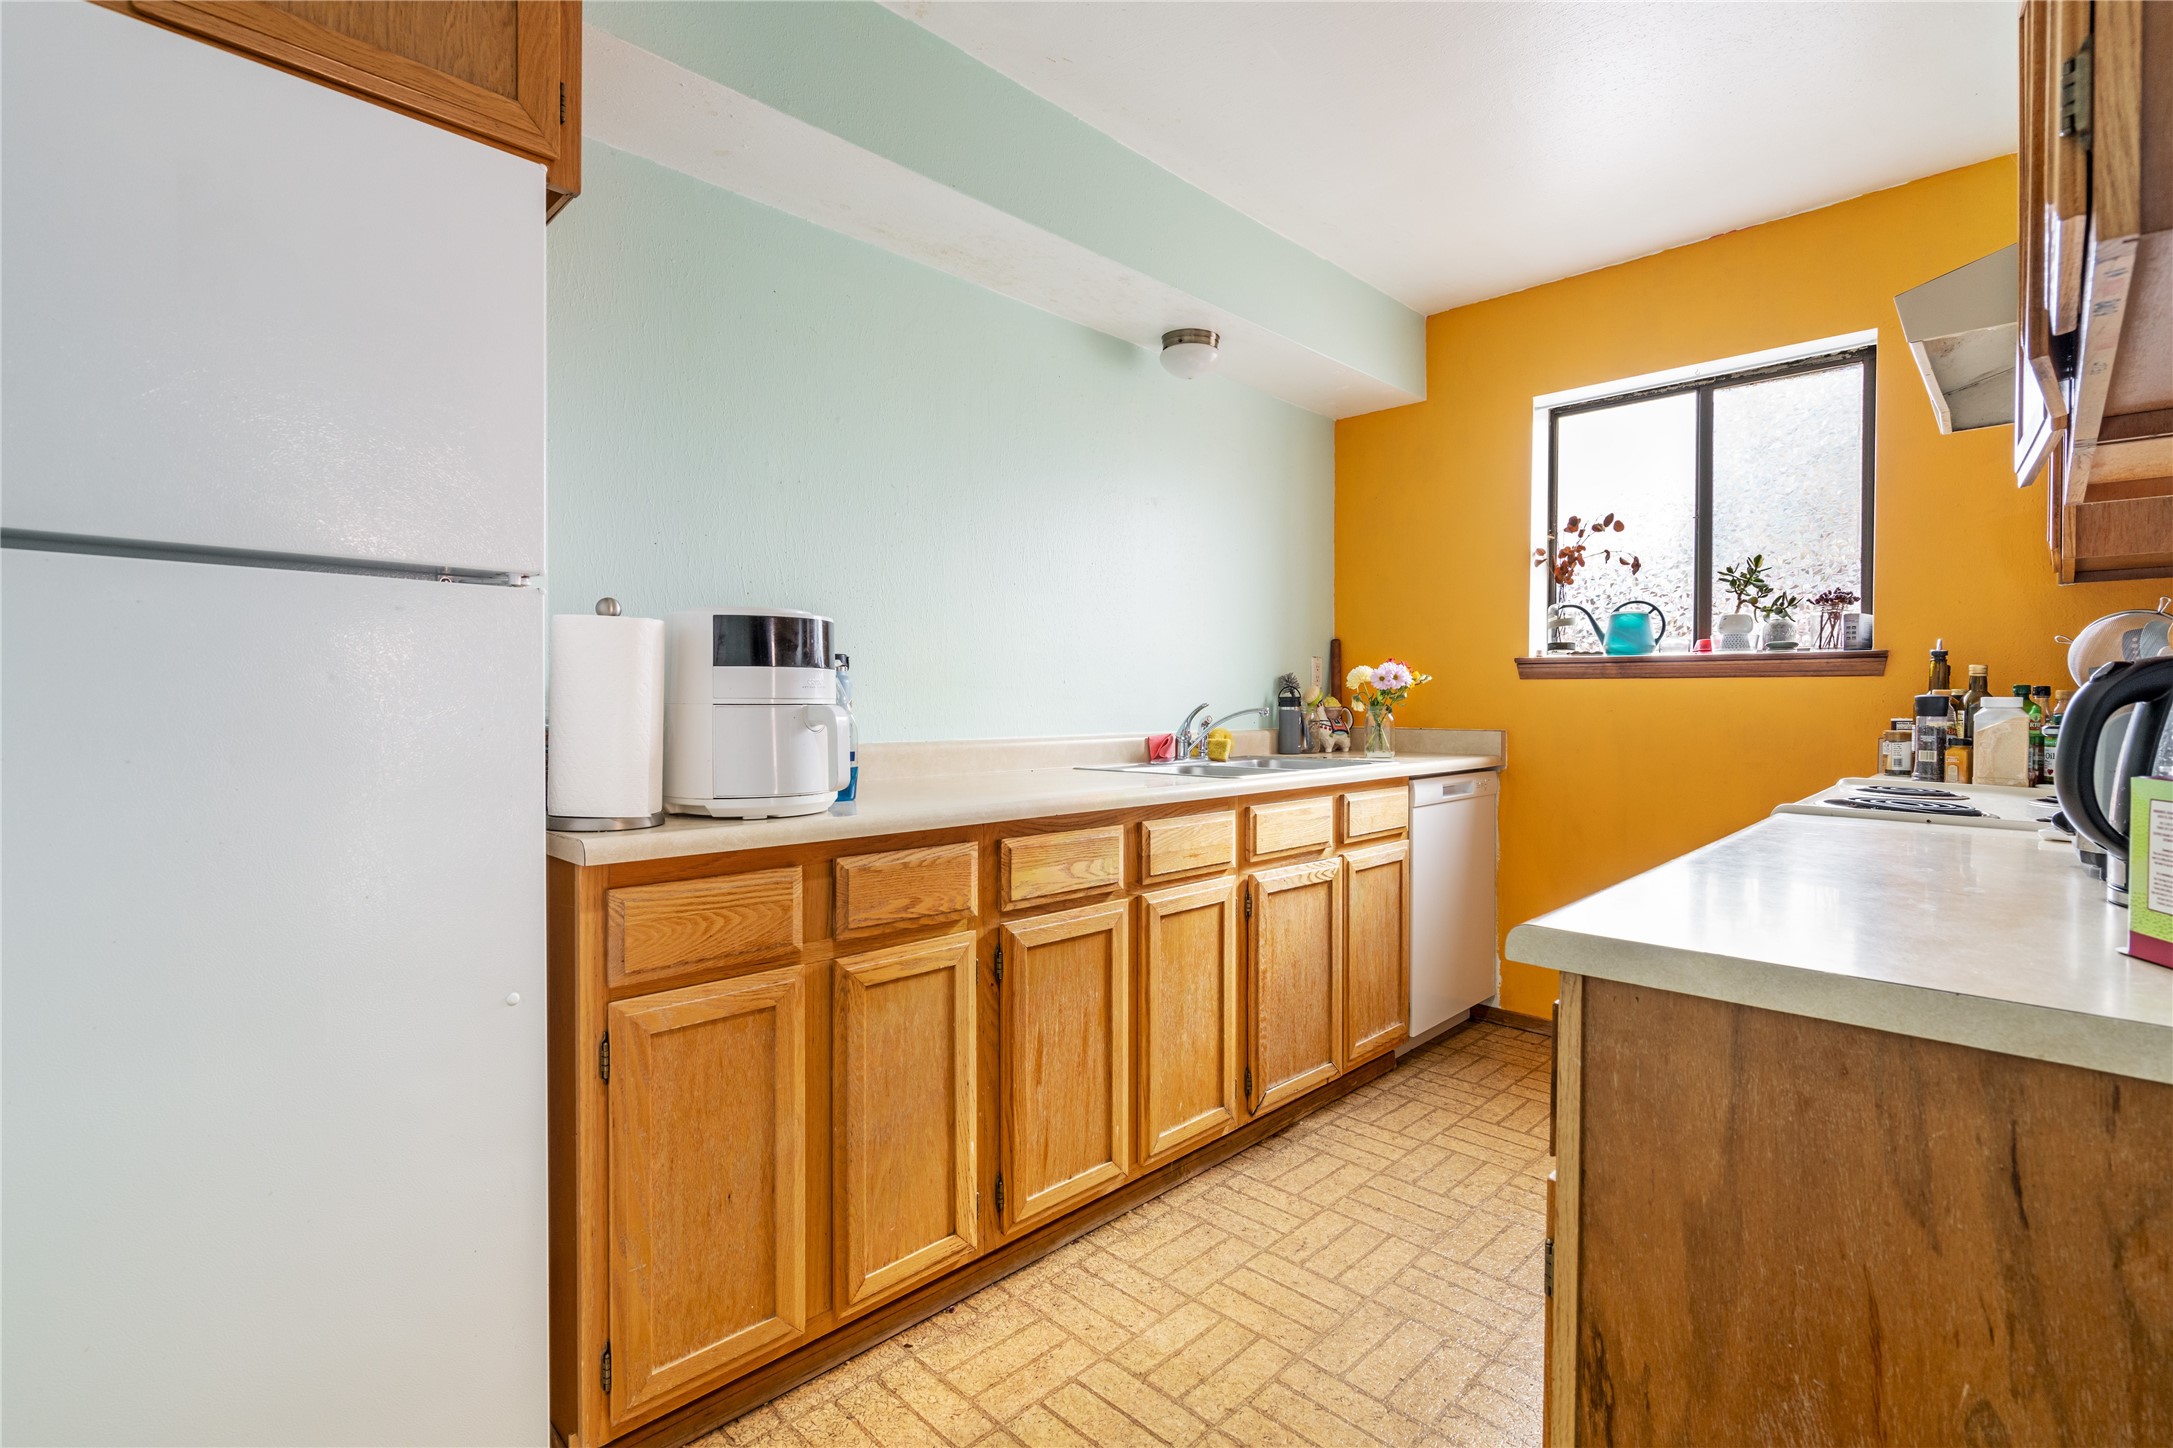 118-120 W Berger Street, Santa Fe, New Mexico 87501, ,Residential Income,For Sale,118-120 W Berger Street,202401250